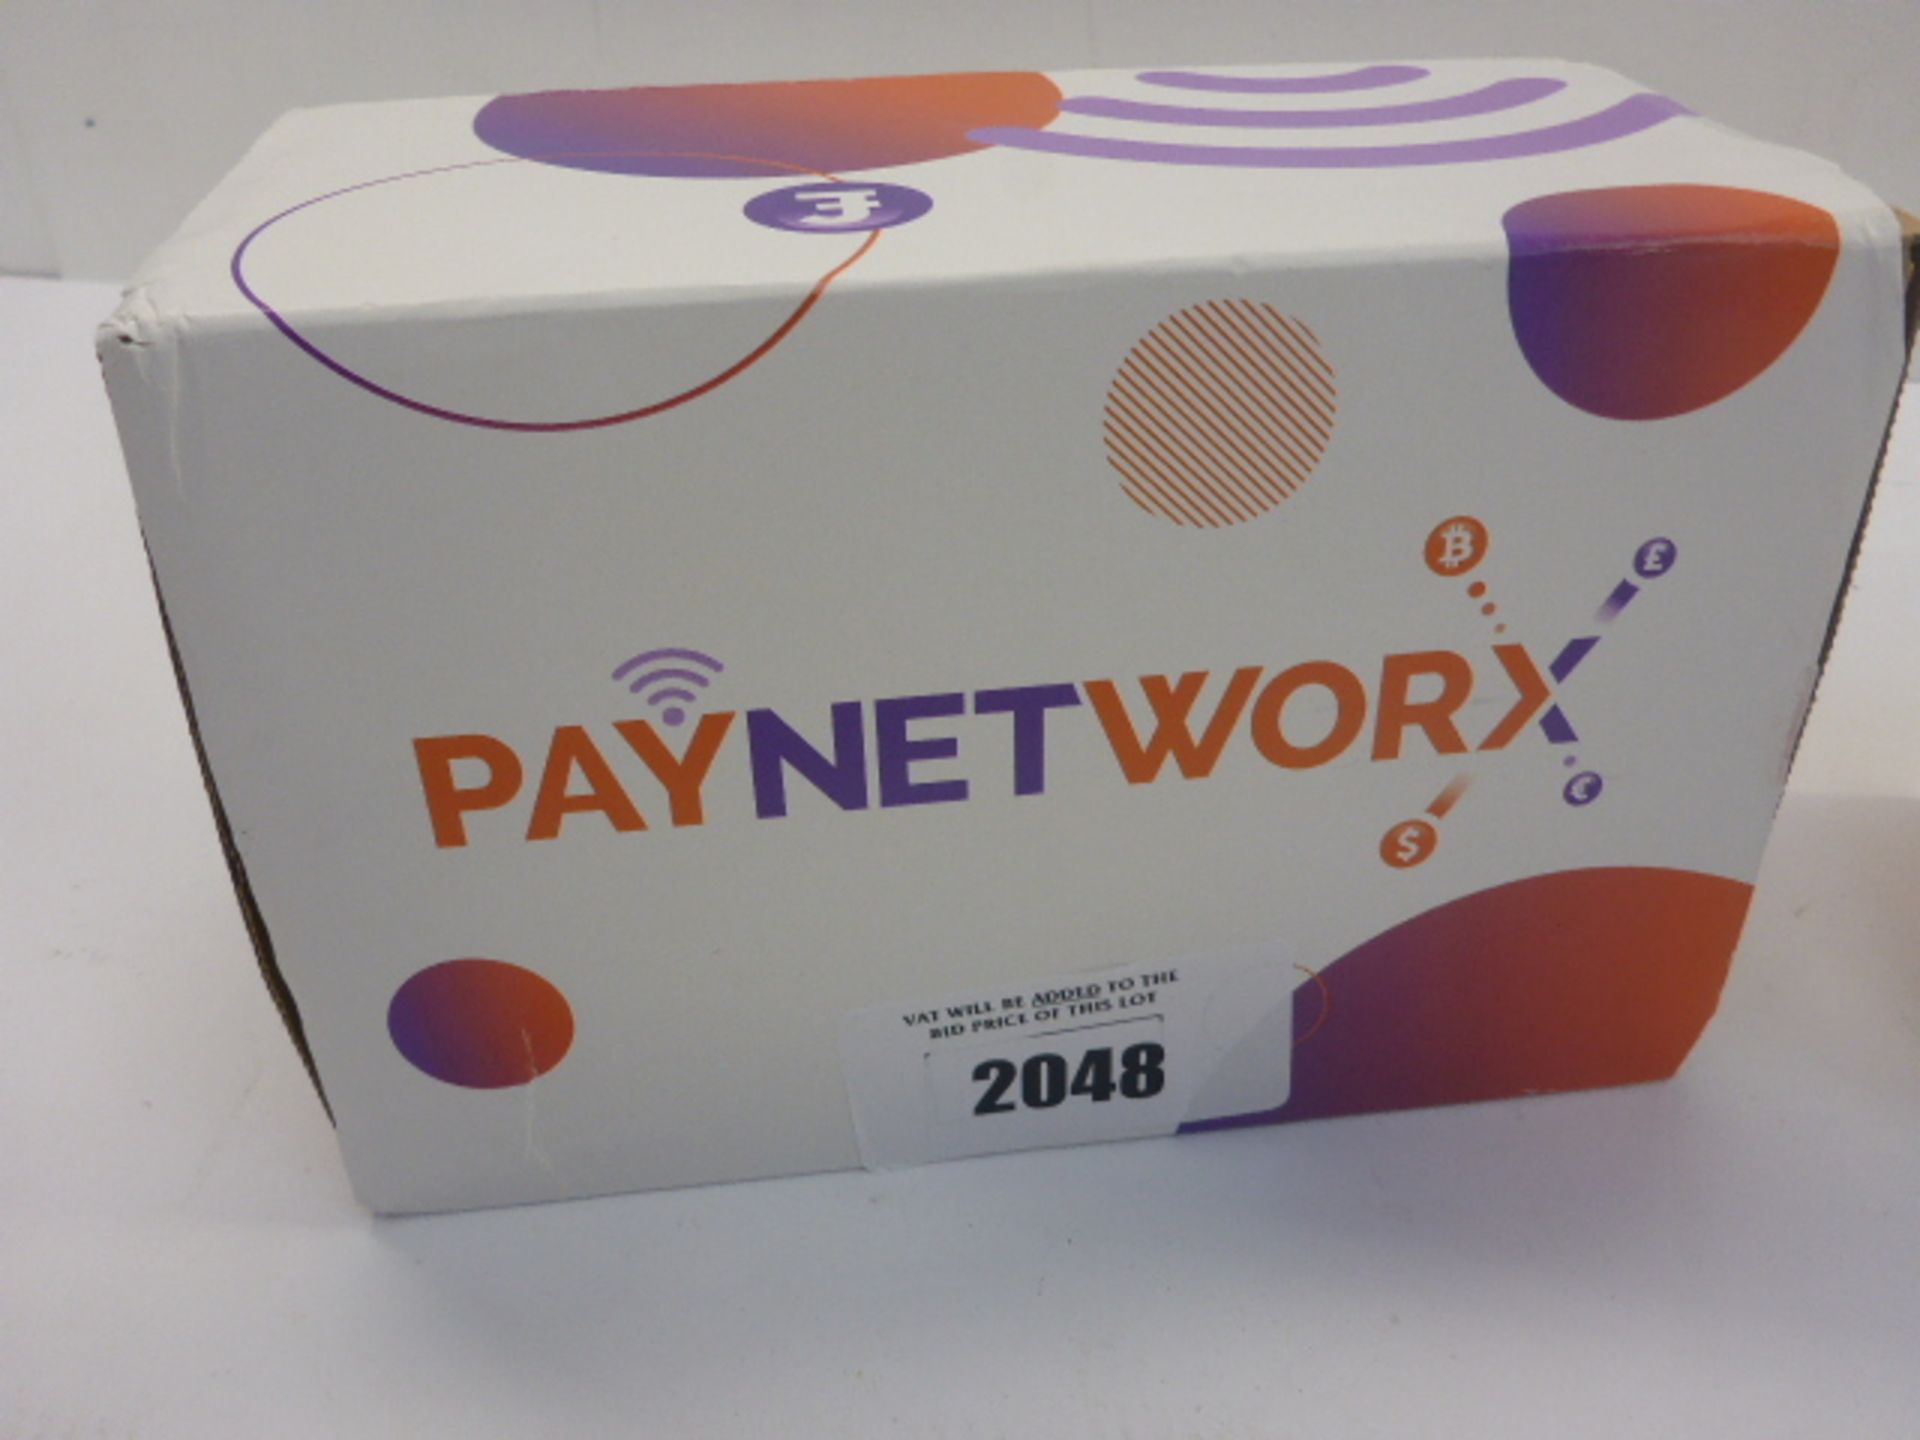 Pay NetworX remote payment device boxed.